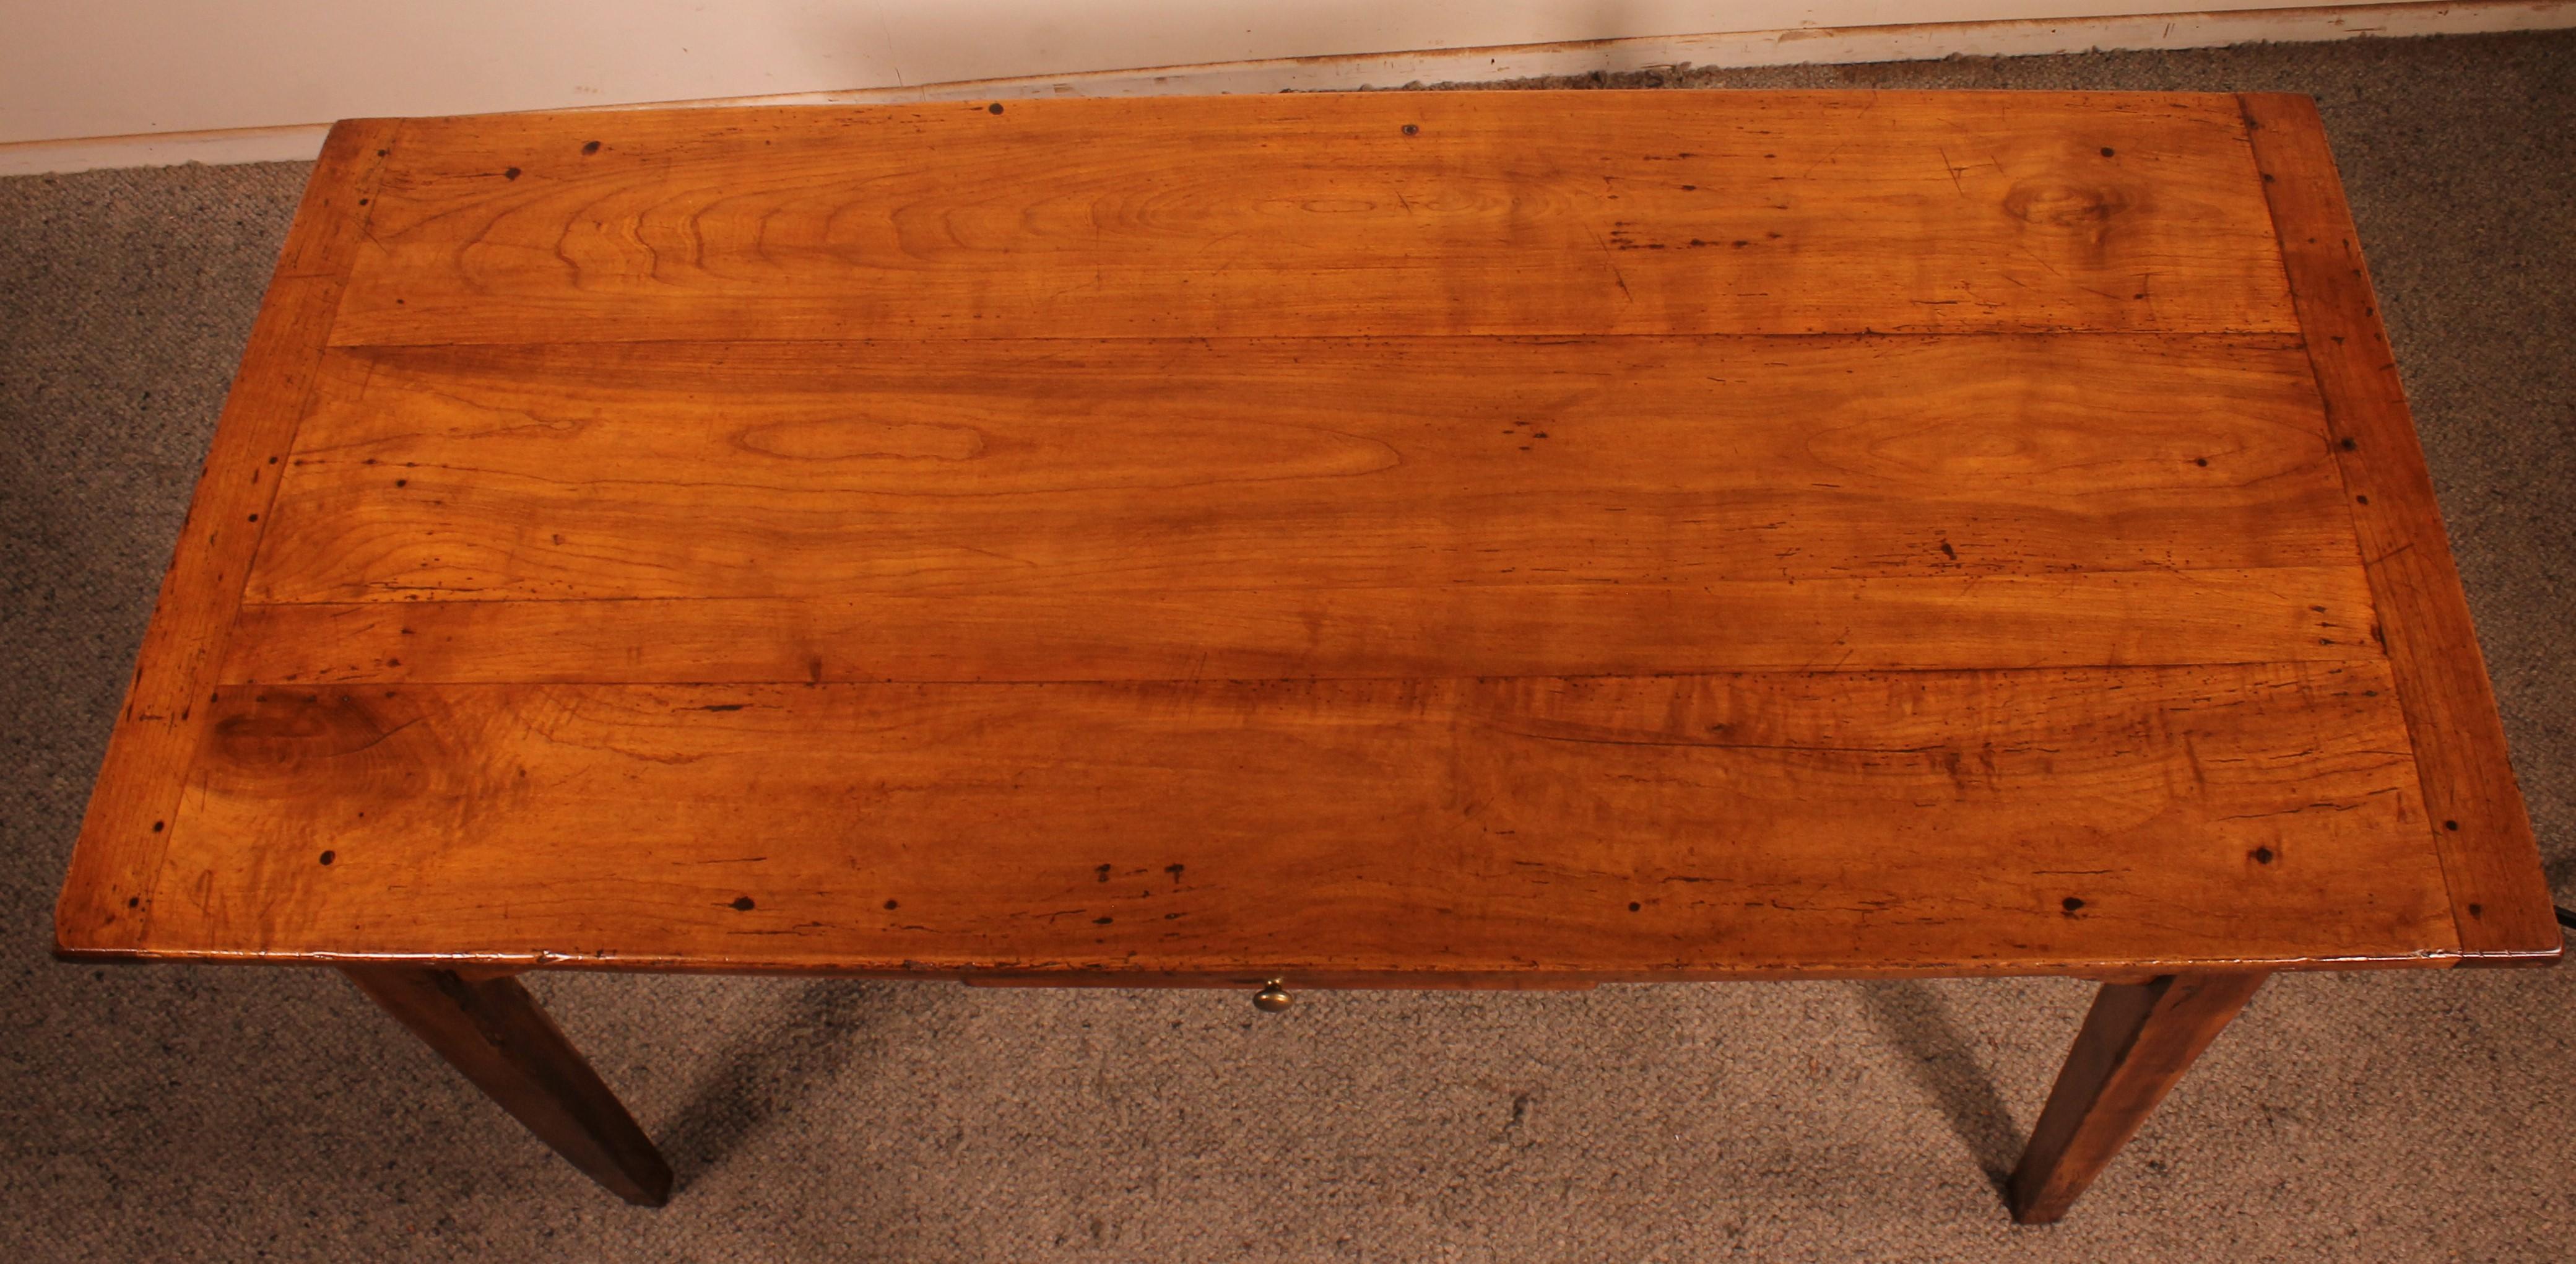 Small Table in Cherry Wood from the 19th Century For Sale 6